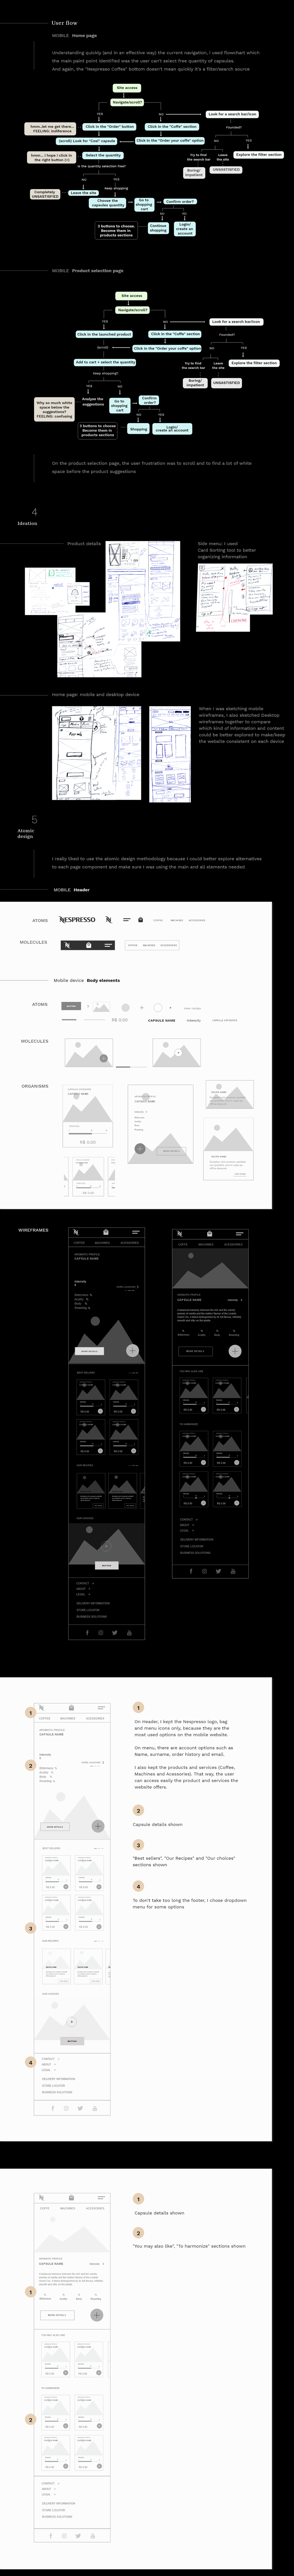 ux UI UX Case Study UX Research user experience Mobile first Atomic Design  Responsive Design redesign website product design 